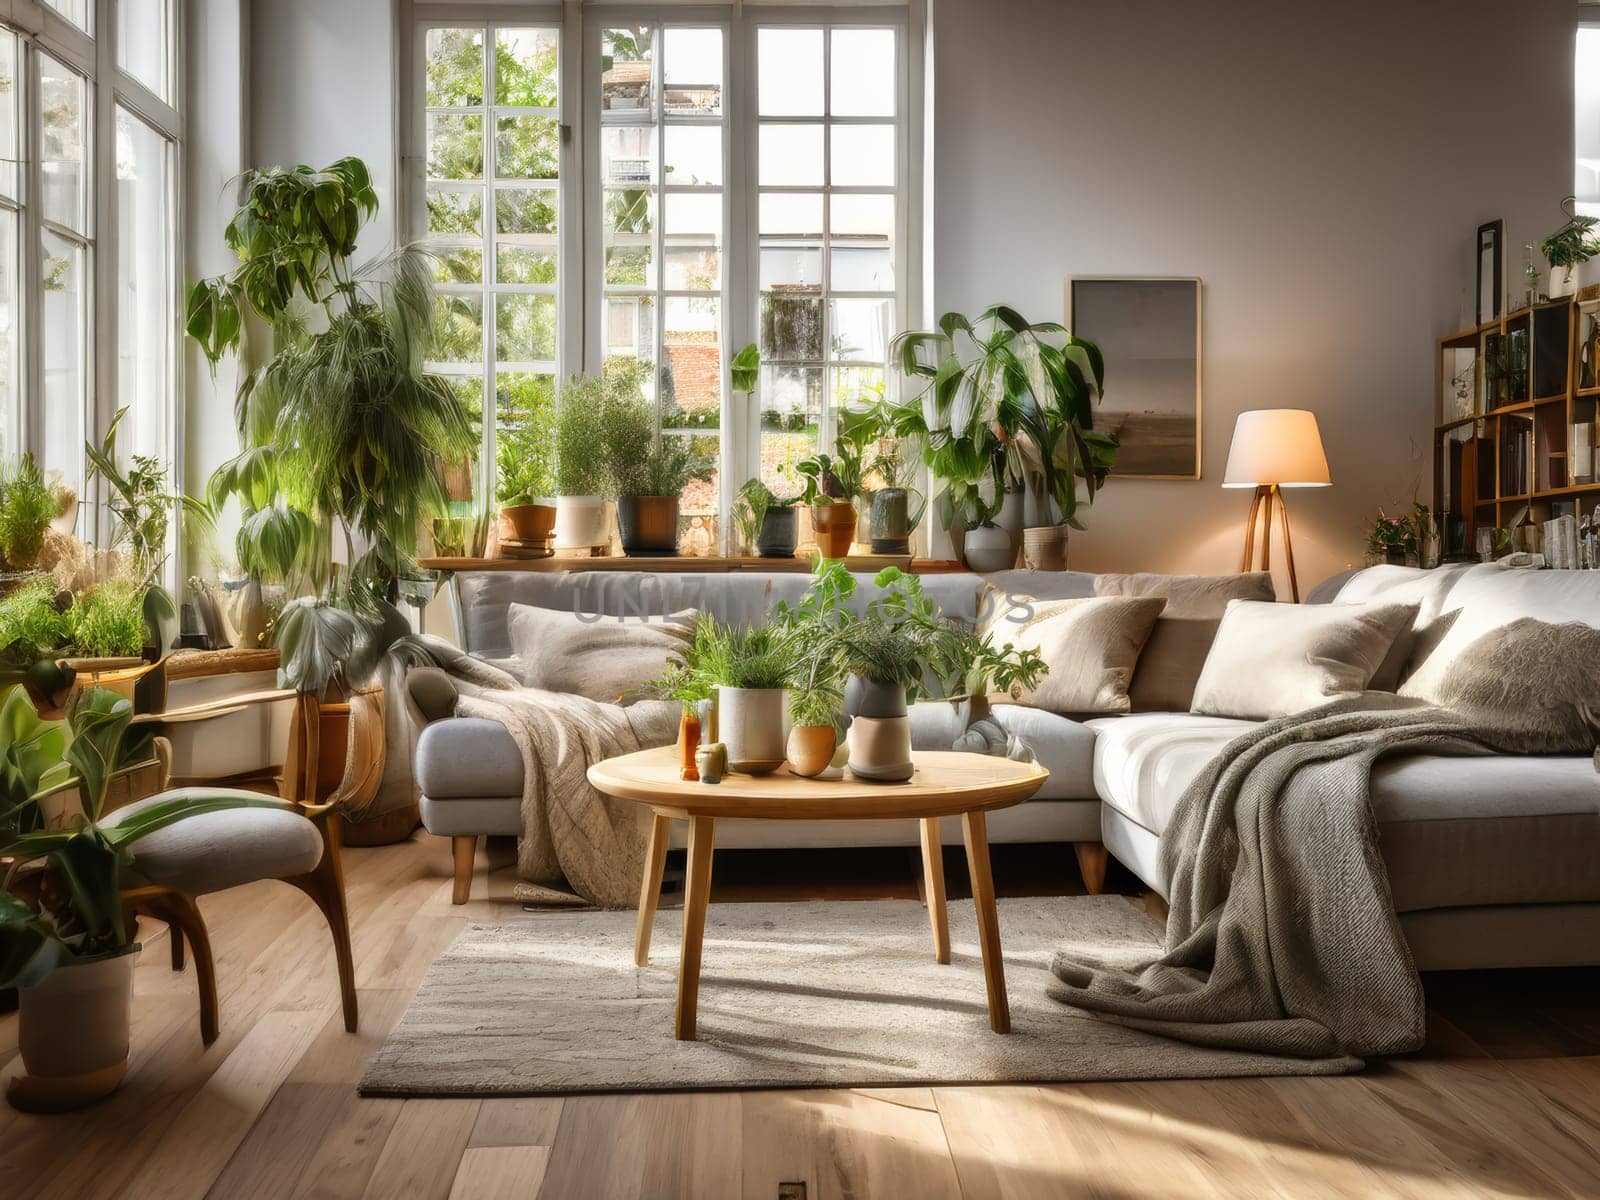 Urban jungle in living room interior. Scandinavian and boho style cozy living room interior with many natural potted plants. Writing desk and chair in room with green plants